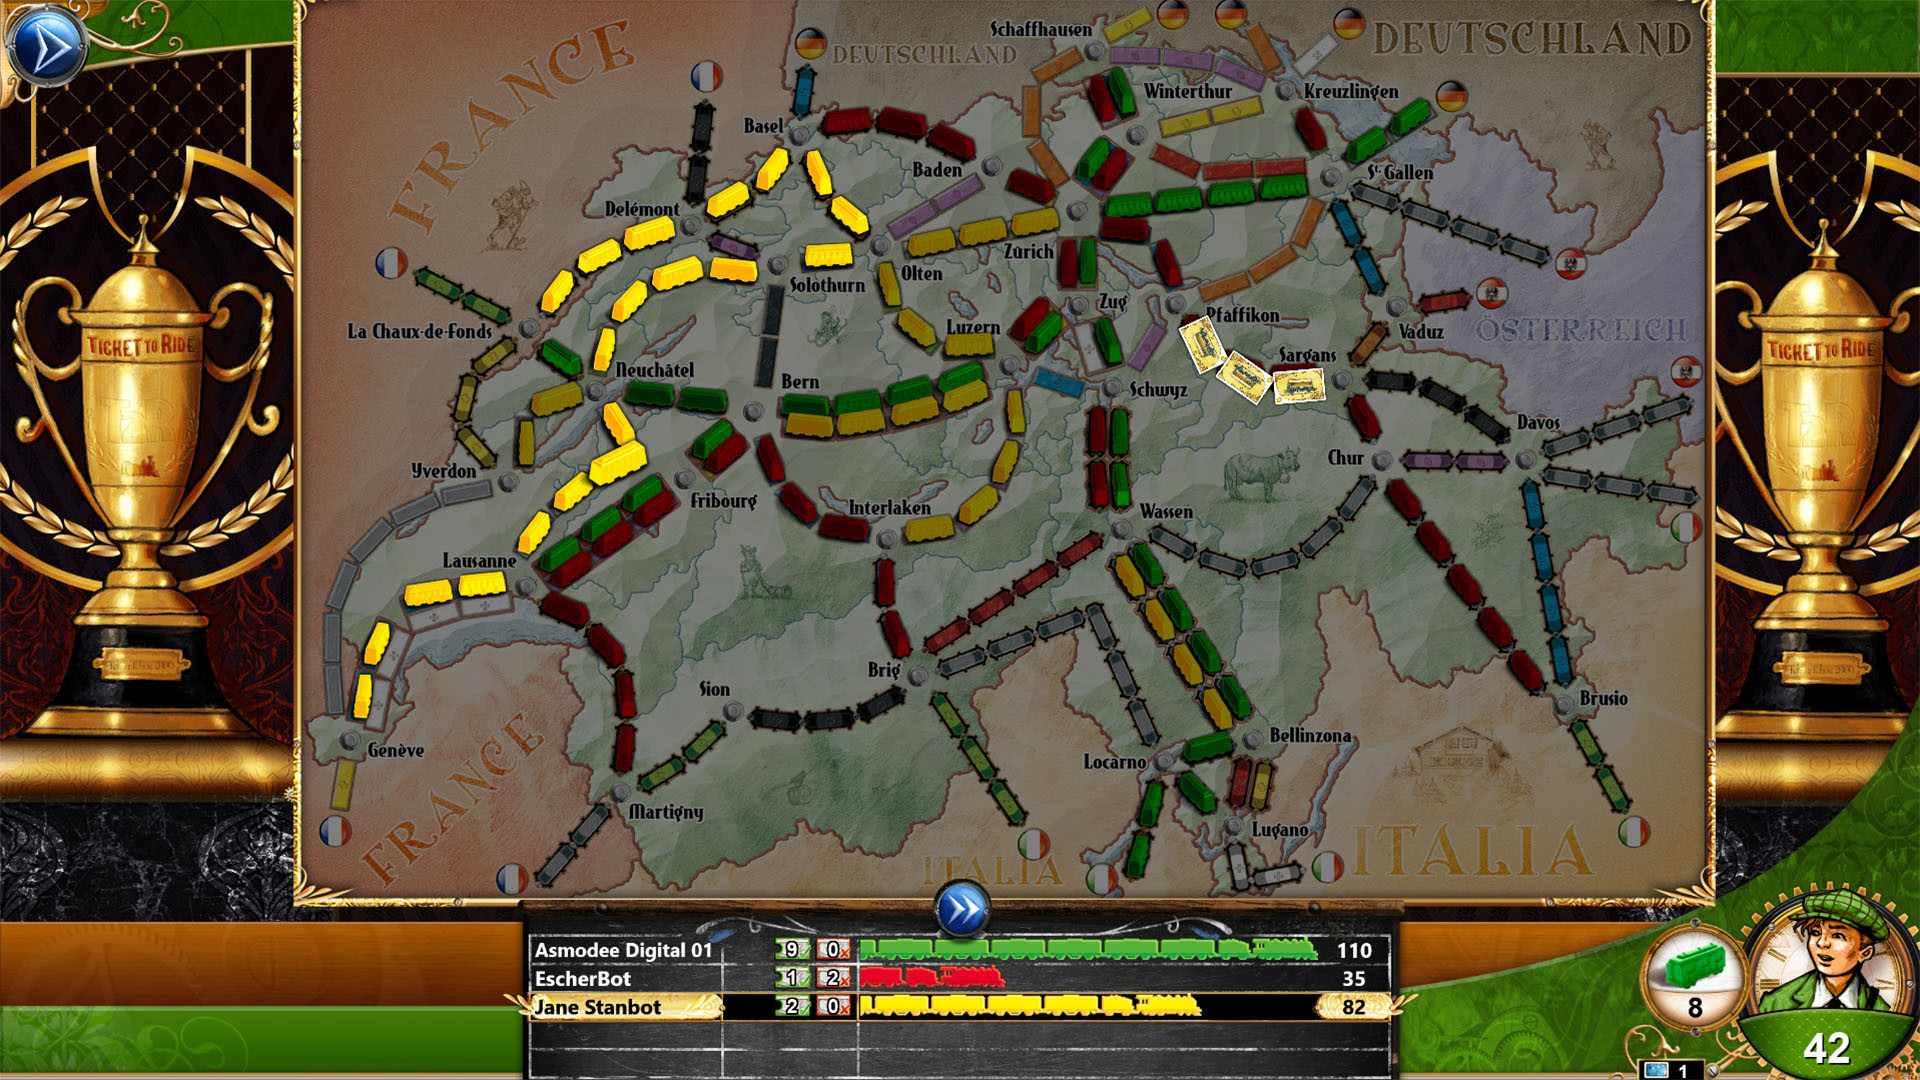 Ticket to ride steam фото 36